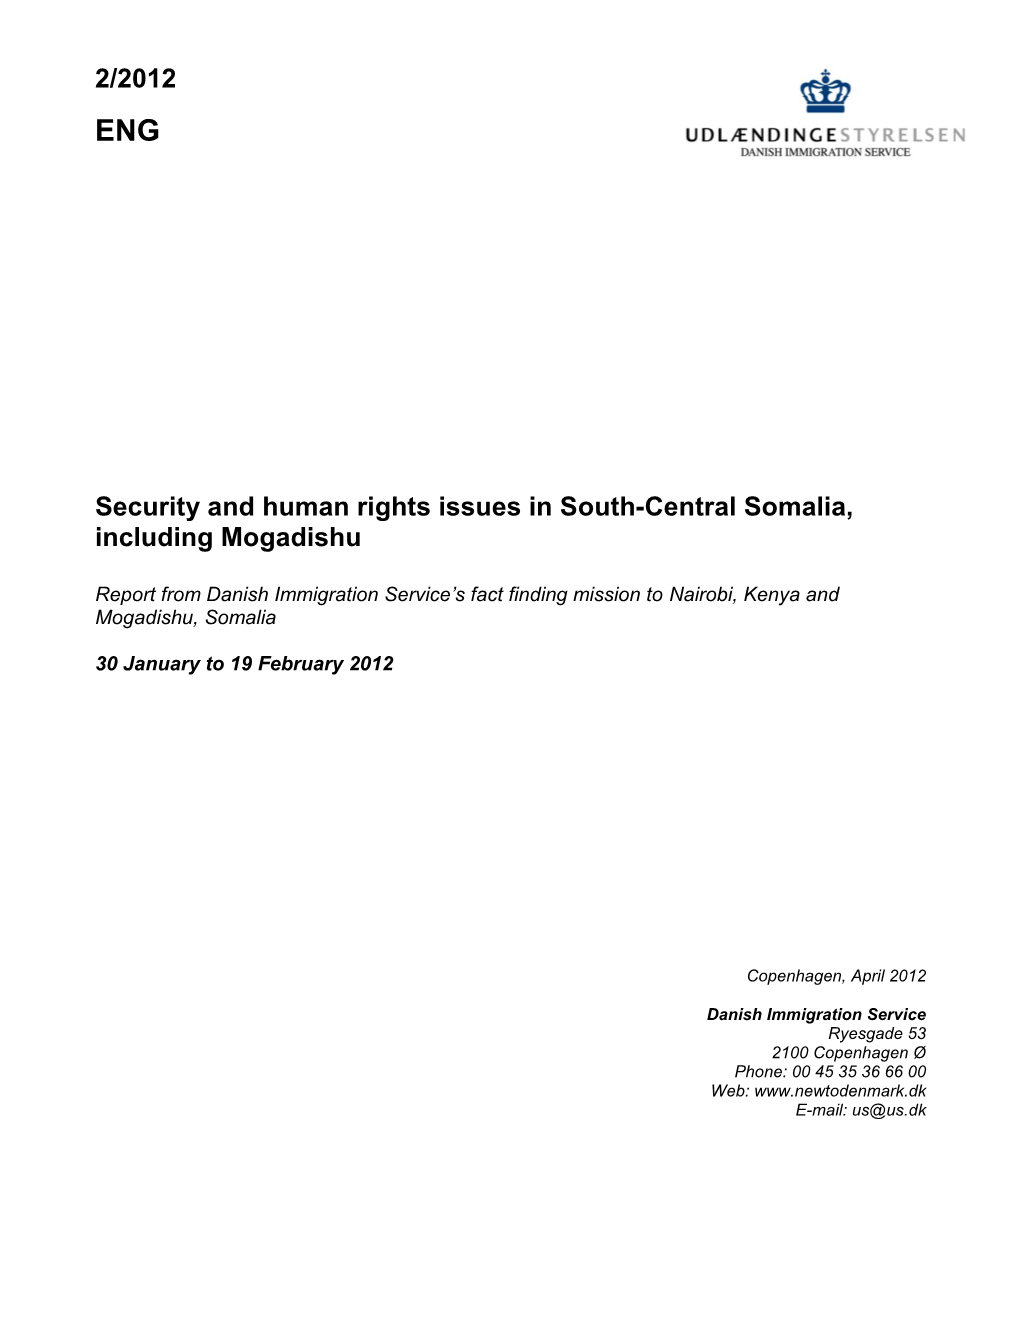 2/2012 Security and Human Rights Issues in South-Central Somalia